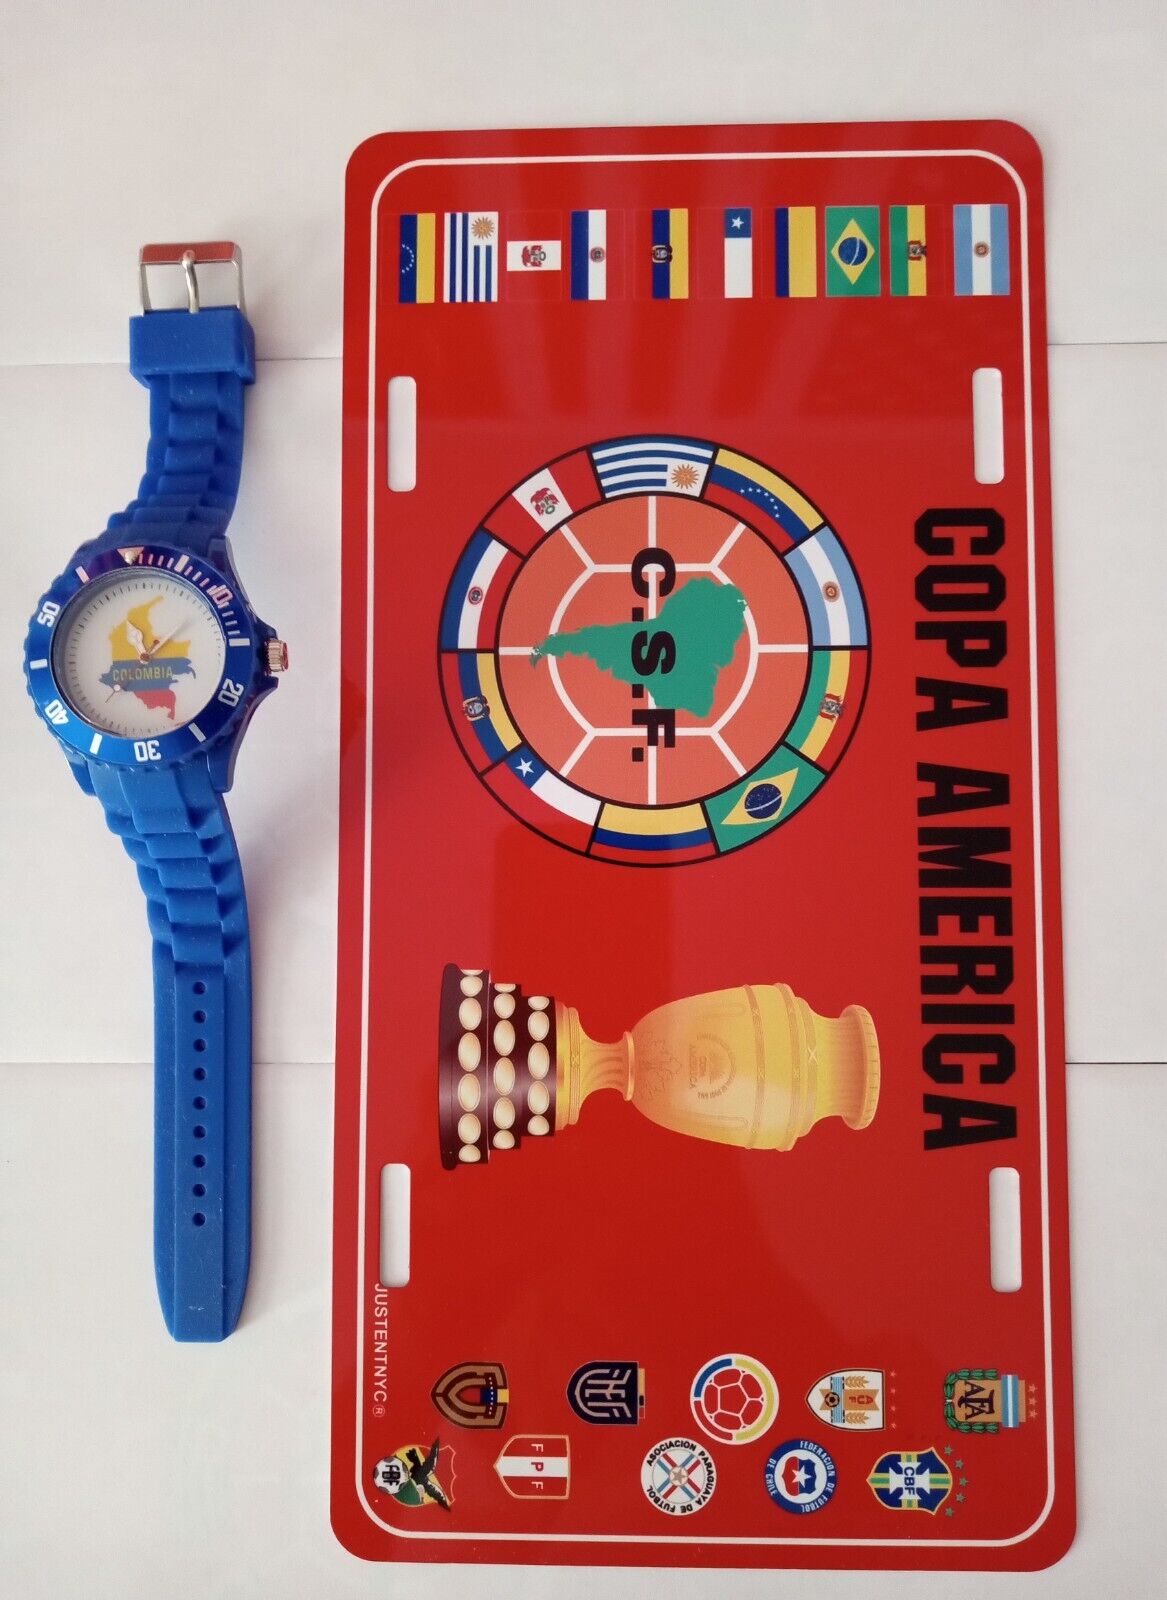 2 COLOMBIA GIFTS: 1  COLOMBIA WATCH + 1 COPA AMERICA GENERIC LICENSE PLATE $25